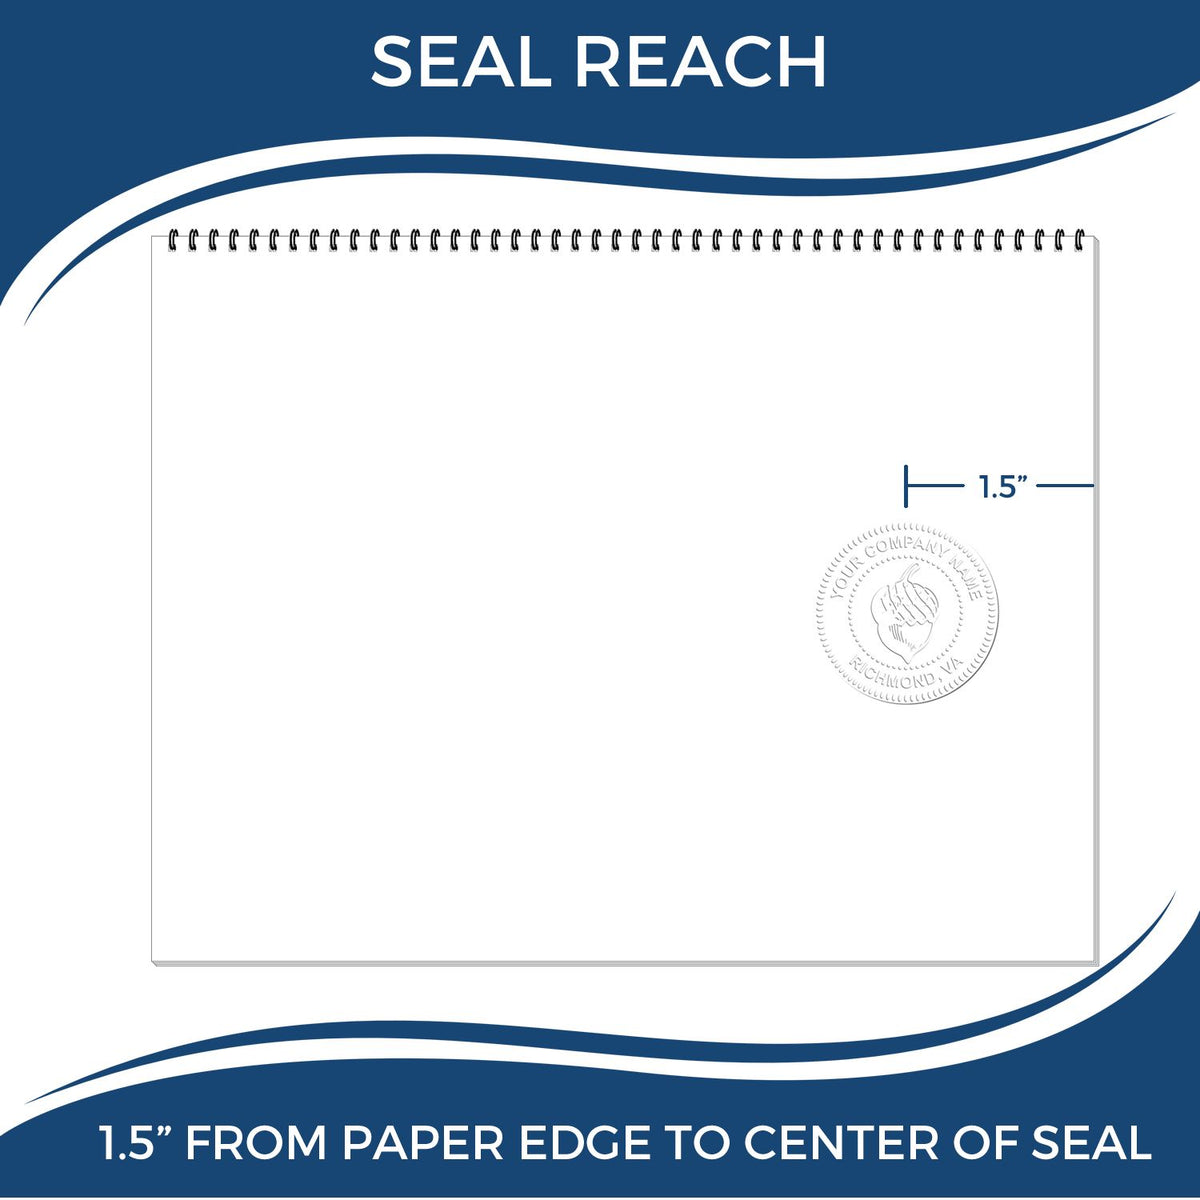 An infographic showing the seal reach which is represented by a ruler and a miniature seal image of the South Dakota Desk Architect Embossing Seal